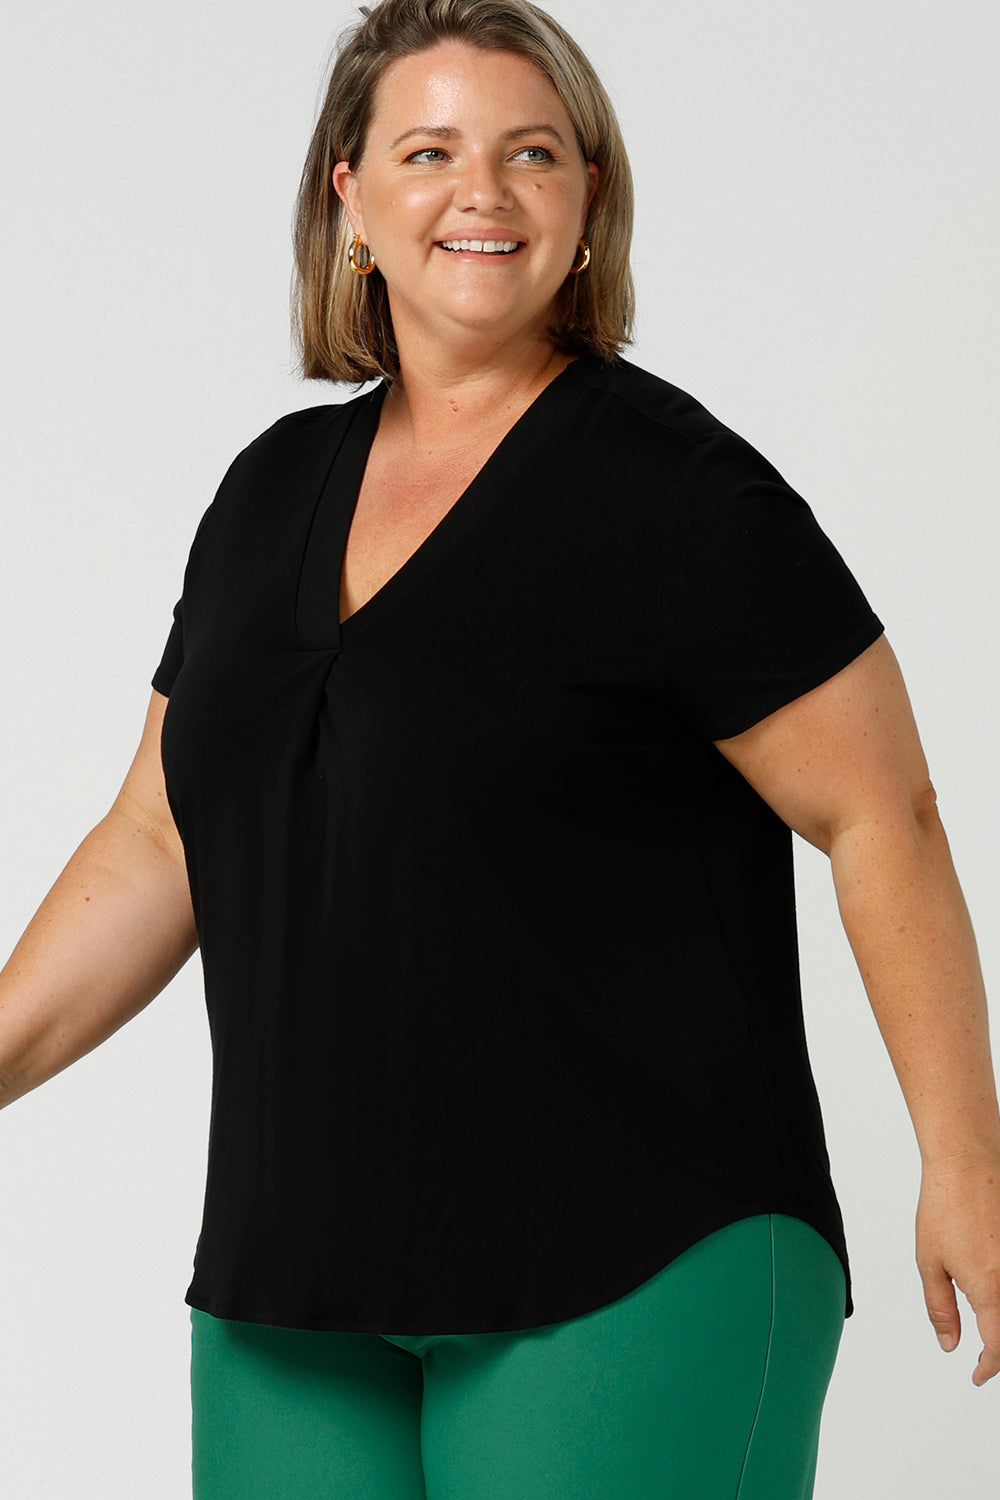 A good top for your capsule wardrobe, this V-neck black bamboo jersey top with short sleeves makes for a good office wear top for women, as well as a comfortable casual top. Shown on a size 18, curvy woman, this is a good top for plus size women. Made by women's clothing brand Australia,  Leina & Fleur, shop black tops for women in sizes 8 to 24 in their online clothing boutique.